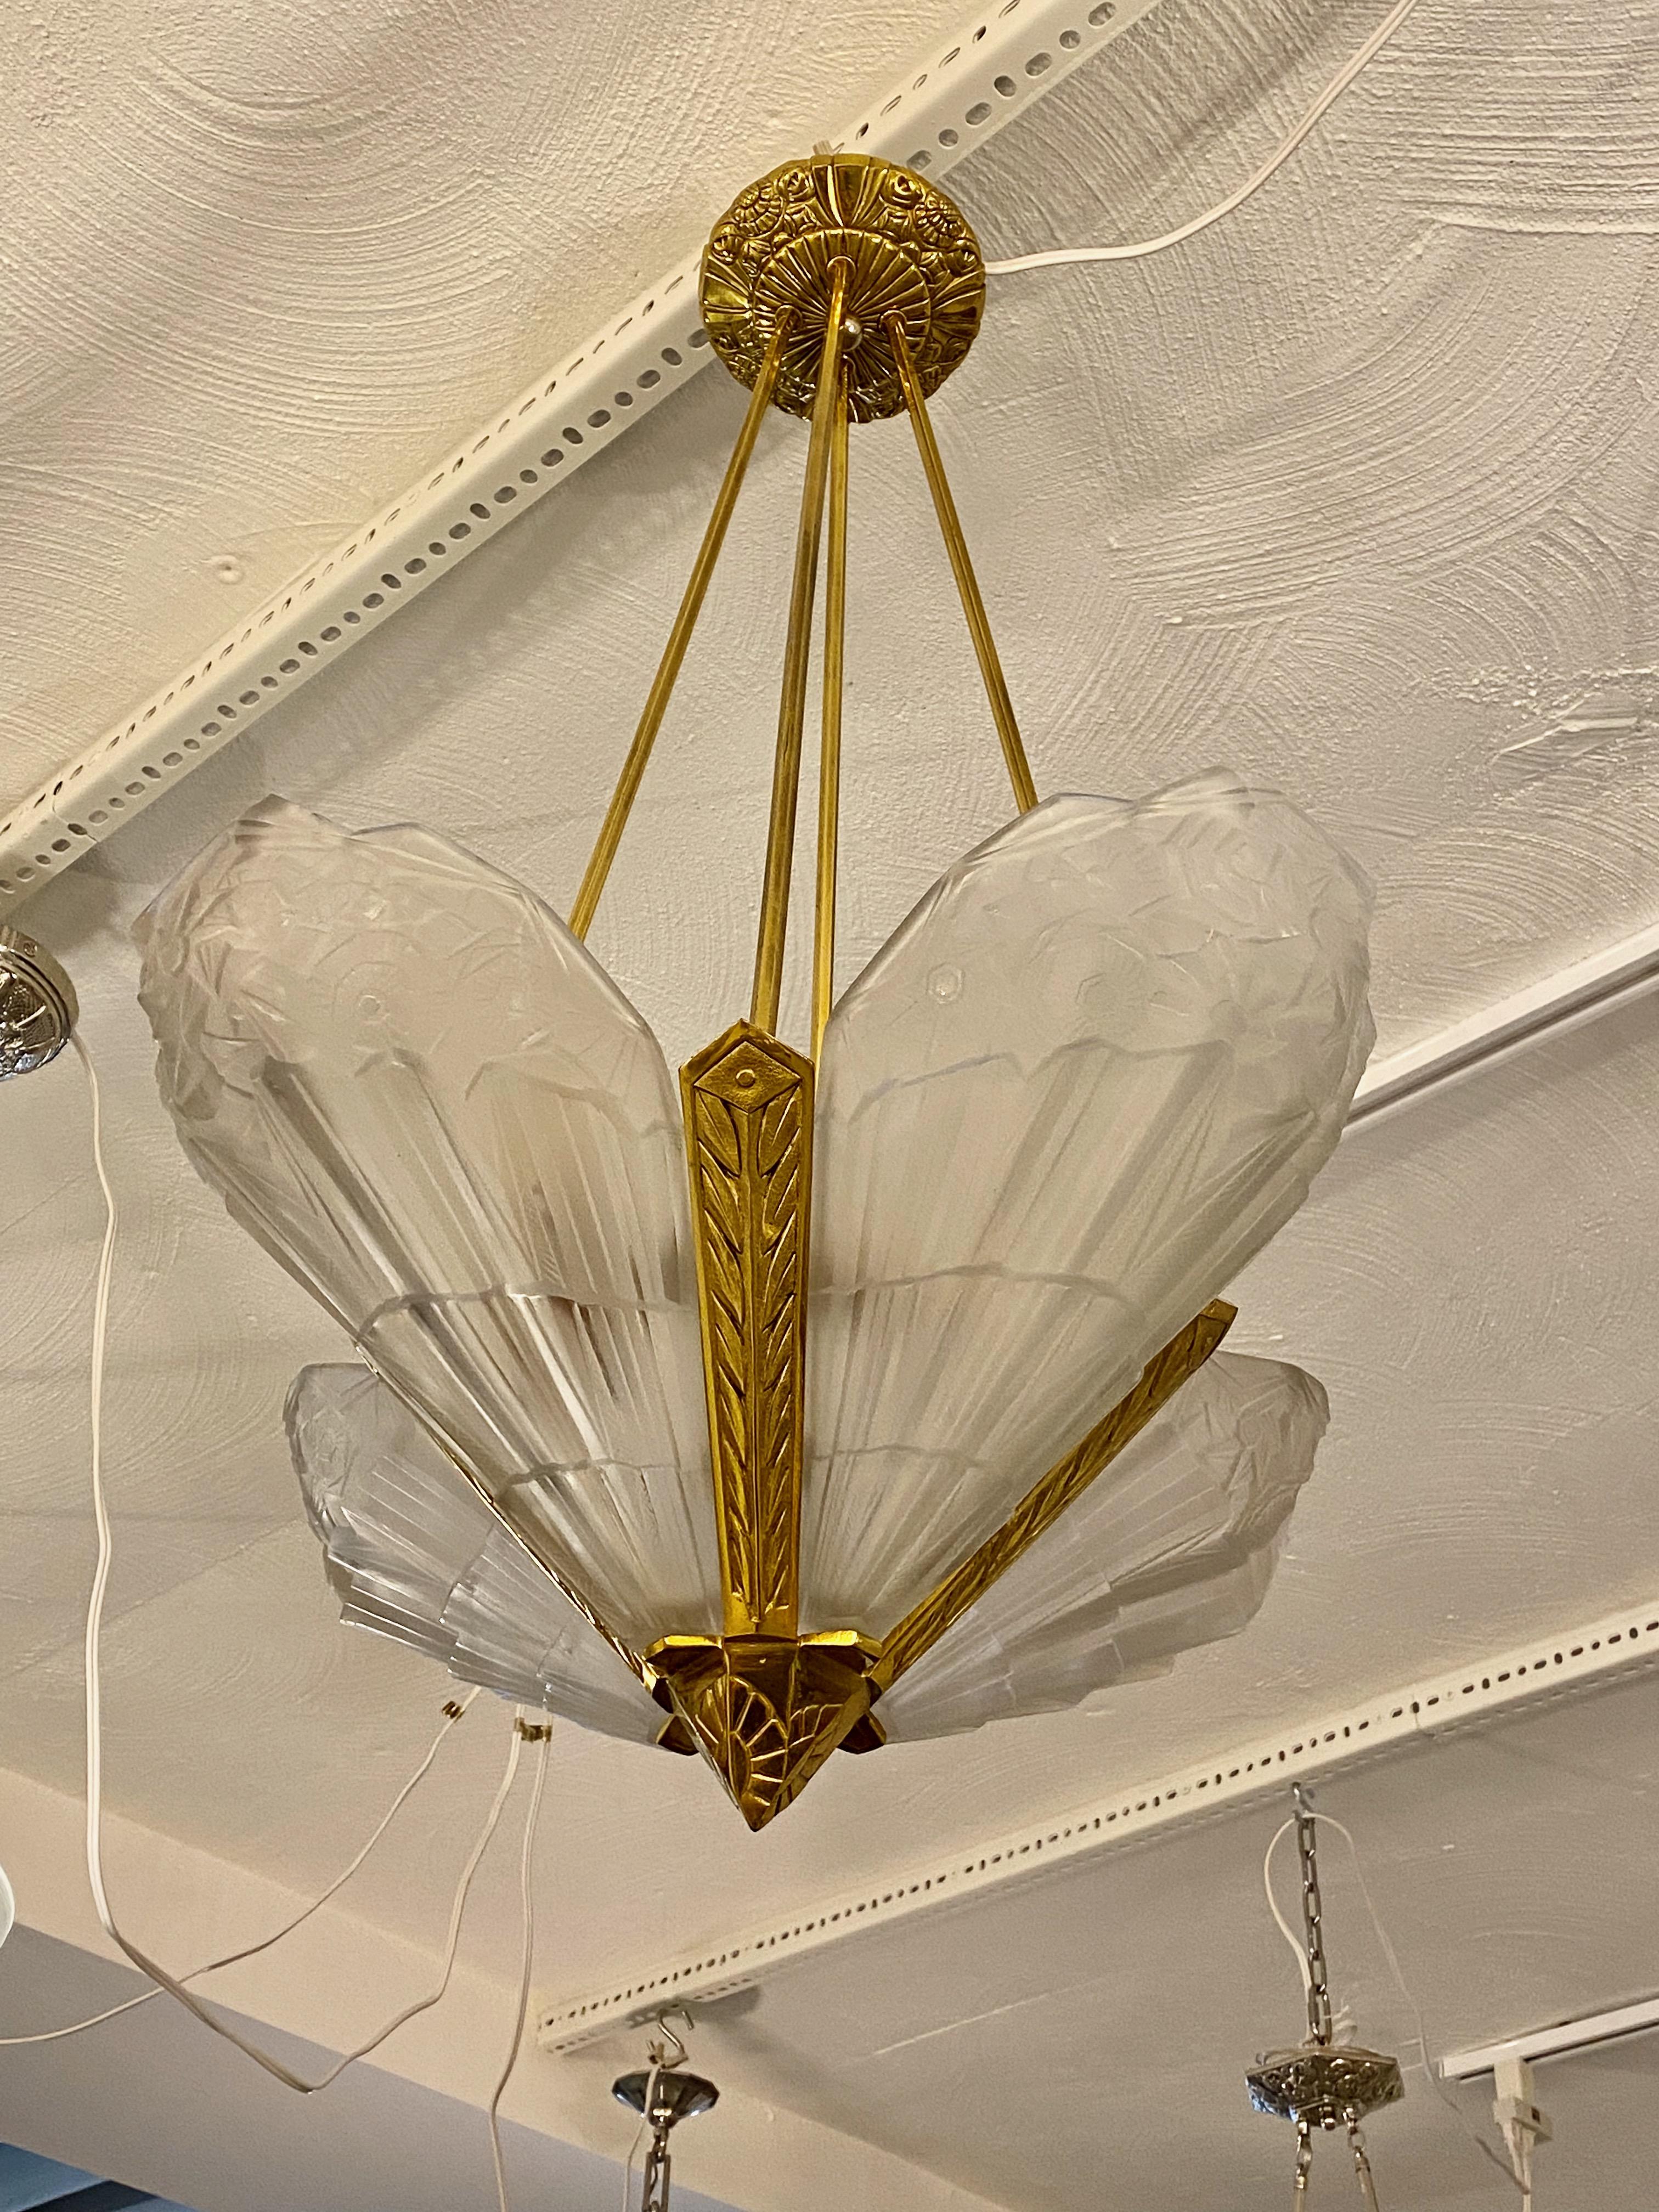 French Art Deco chandelier signed by the French artist J. Robert. Four glass panels with geometric and floral design. Rest in a matching brass frame having geometric and floral design throughout. Has been rewired for American use with four